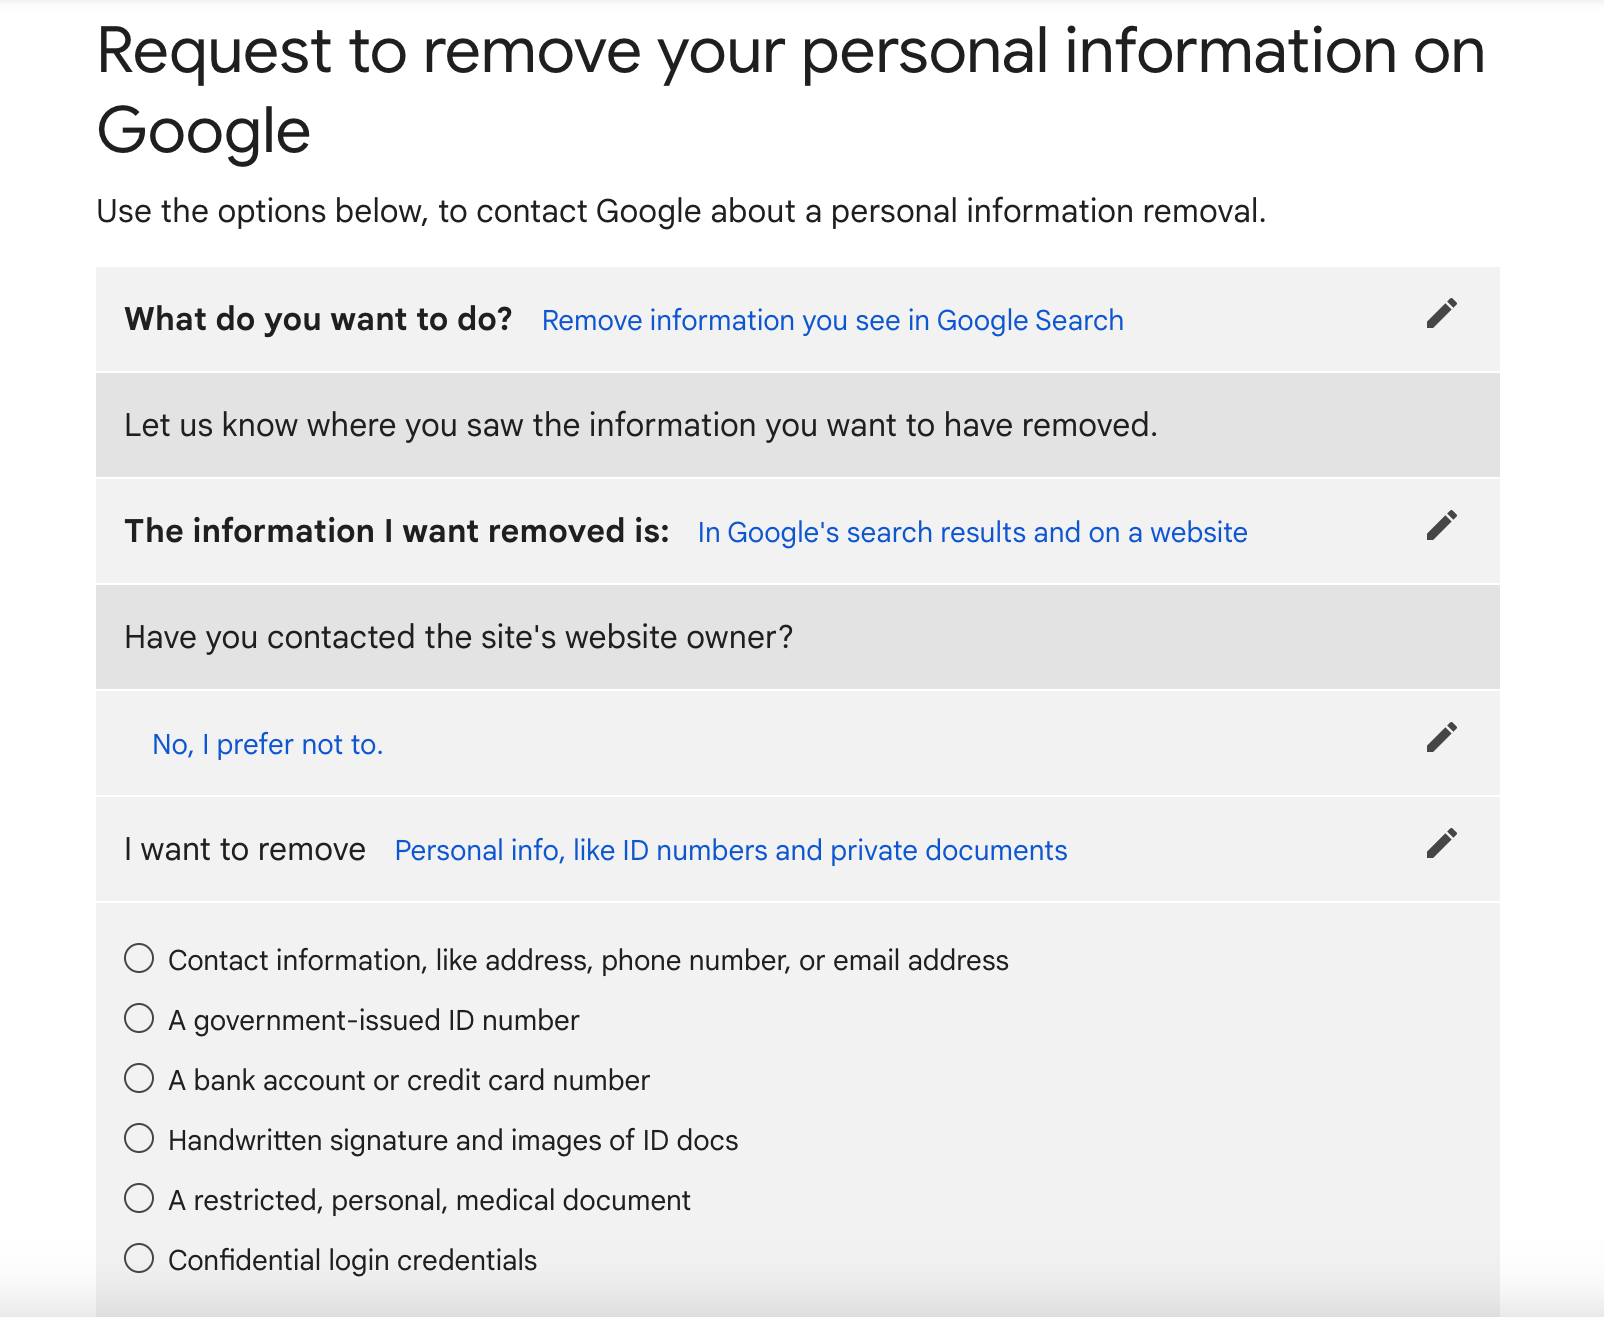 How to Remove Your Personal Information from Google Search Results